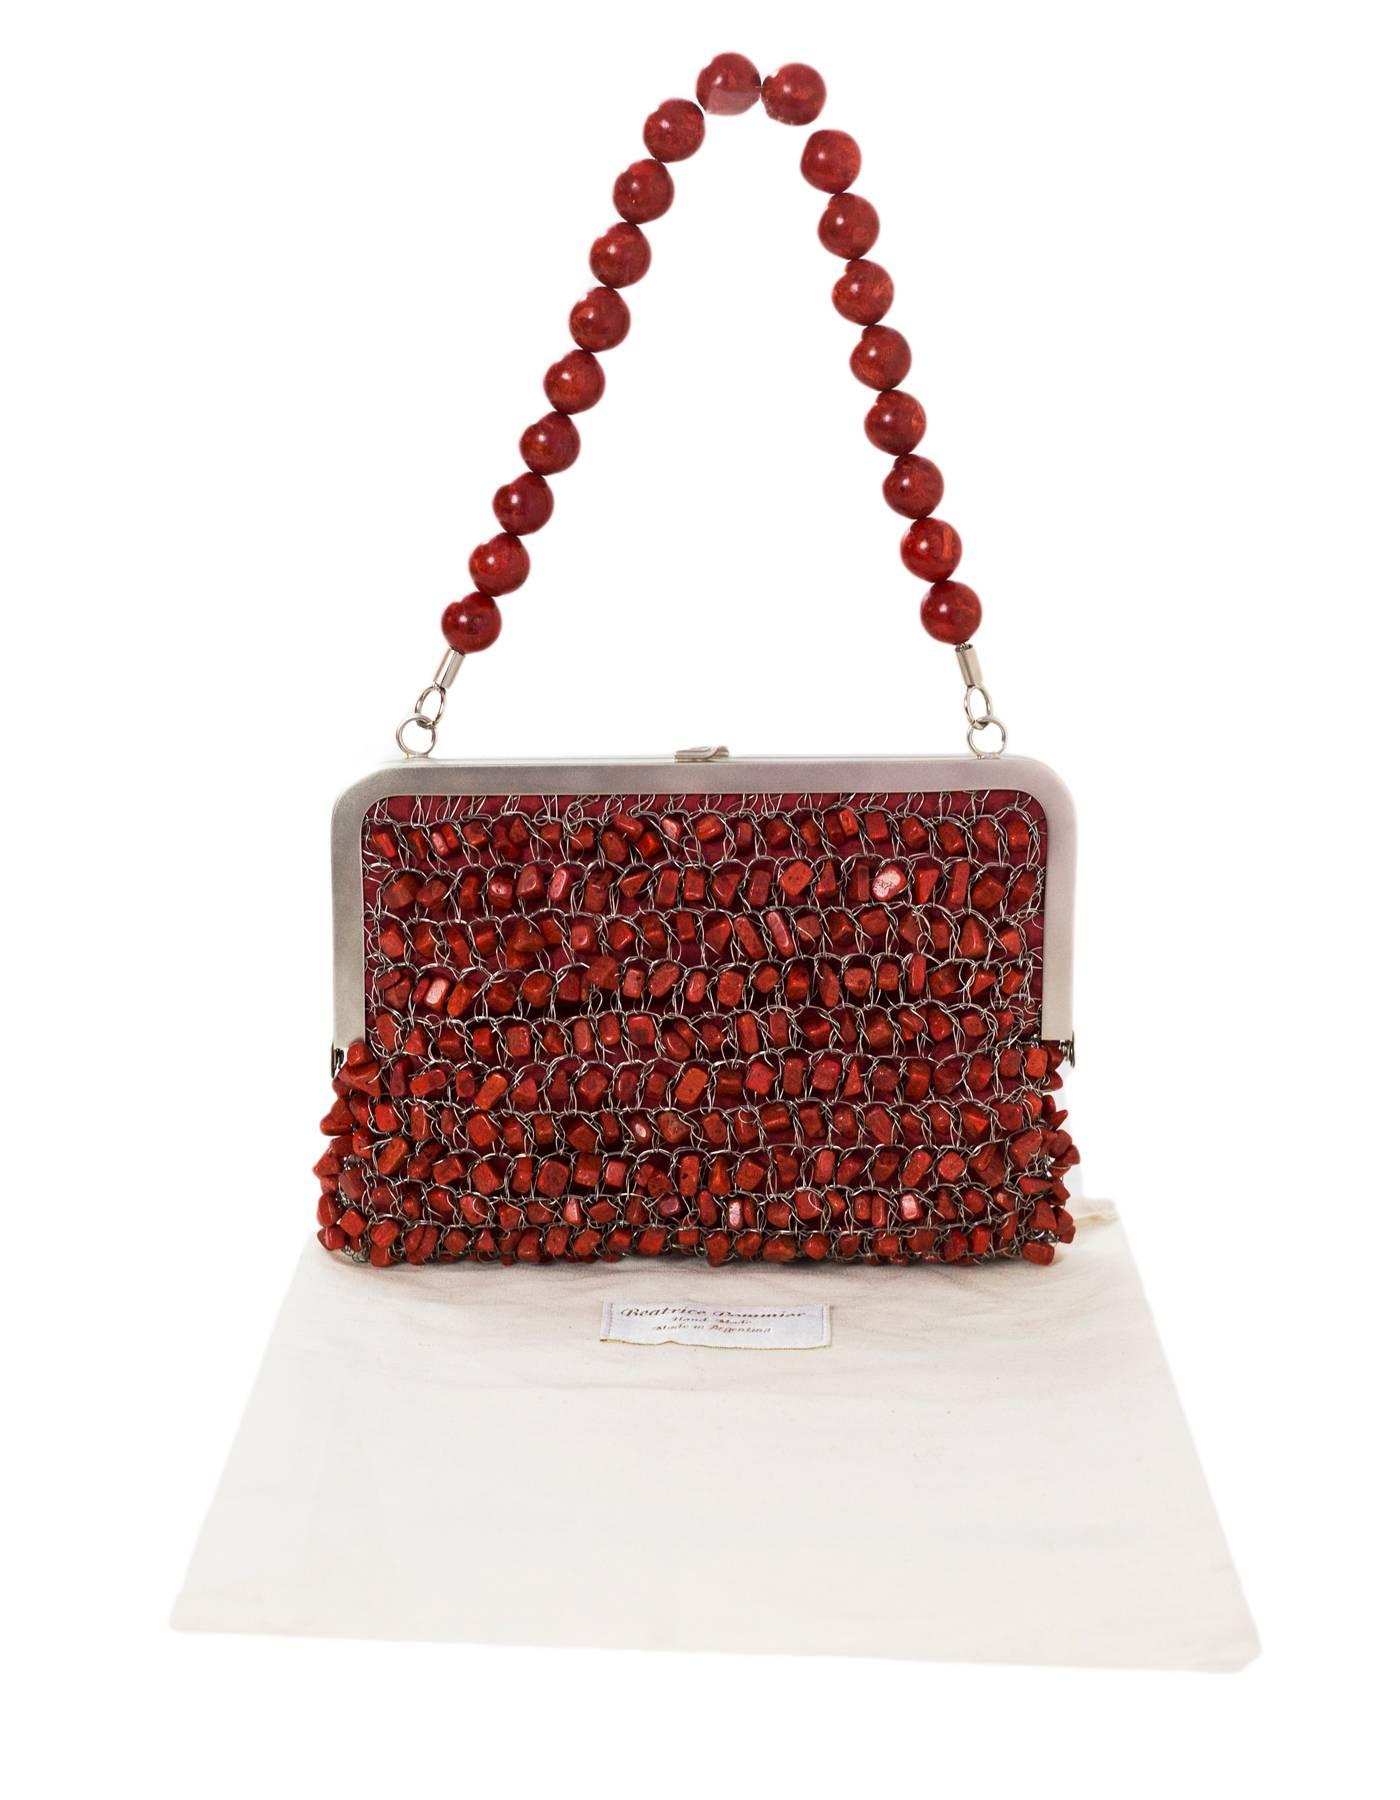 Beatrice Pommier Coral Hand-Crafted Beaded Handbag 2